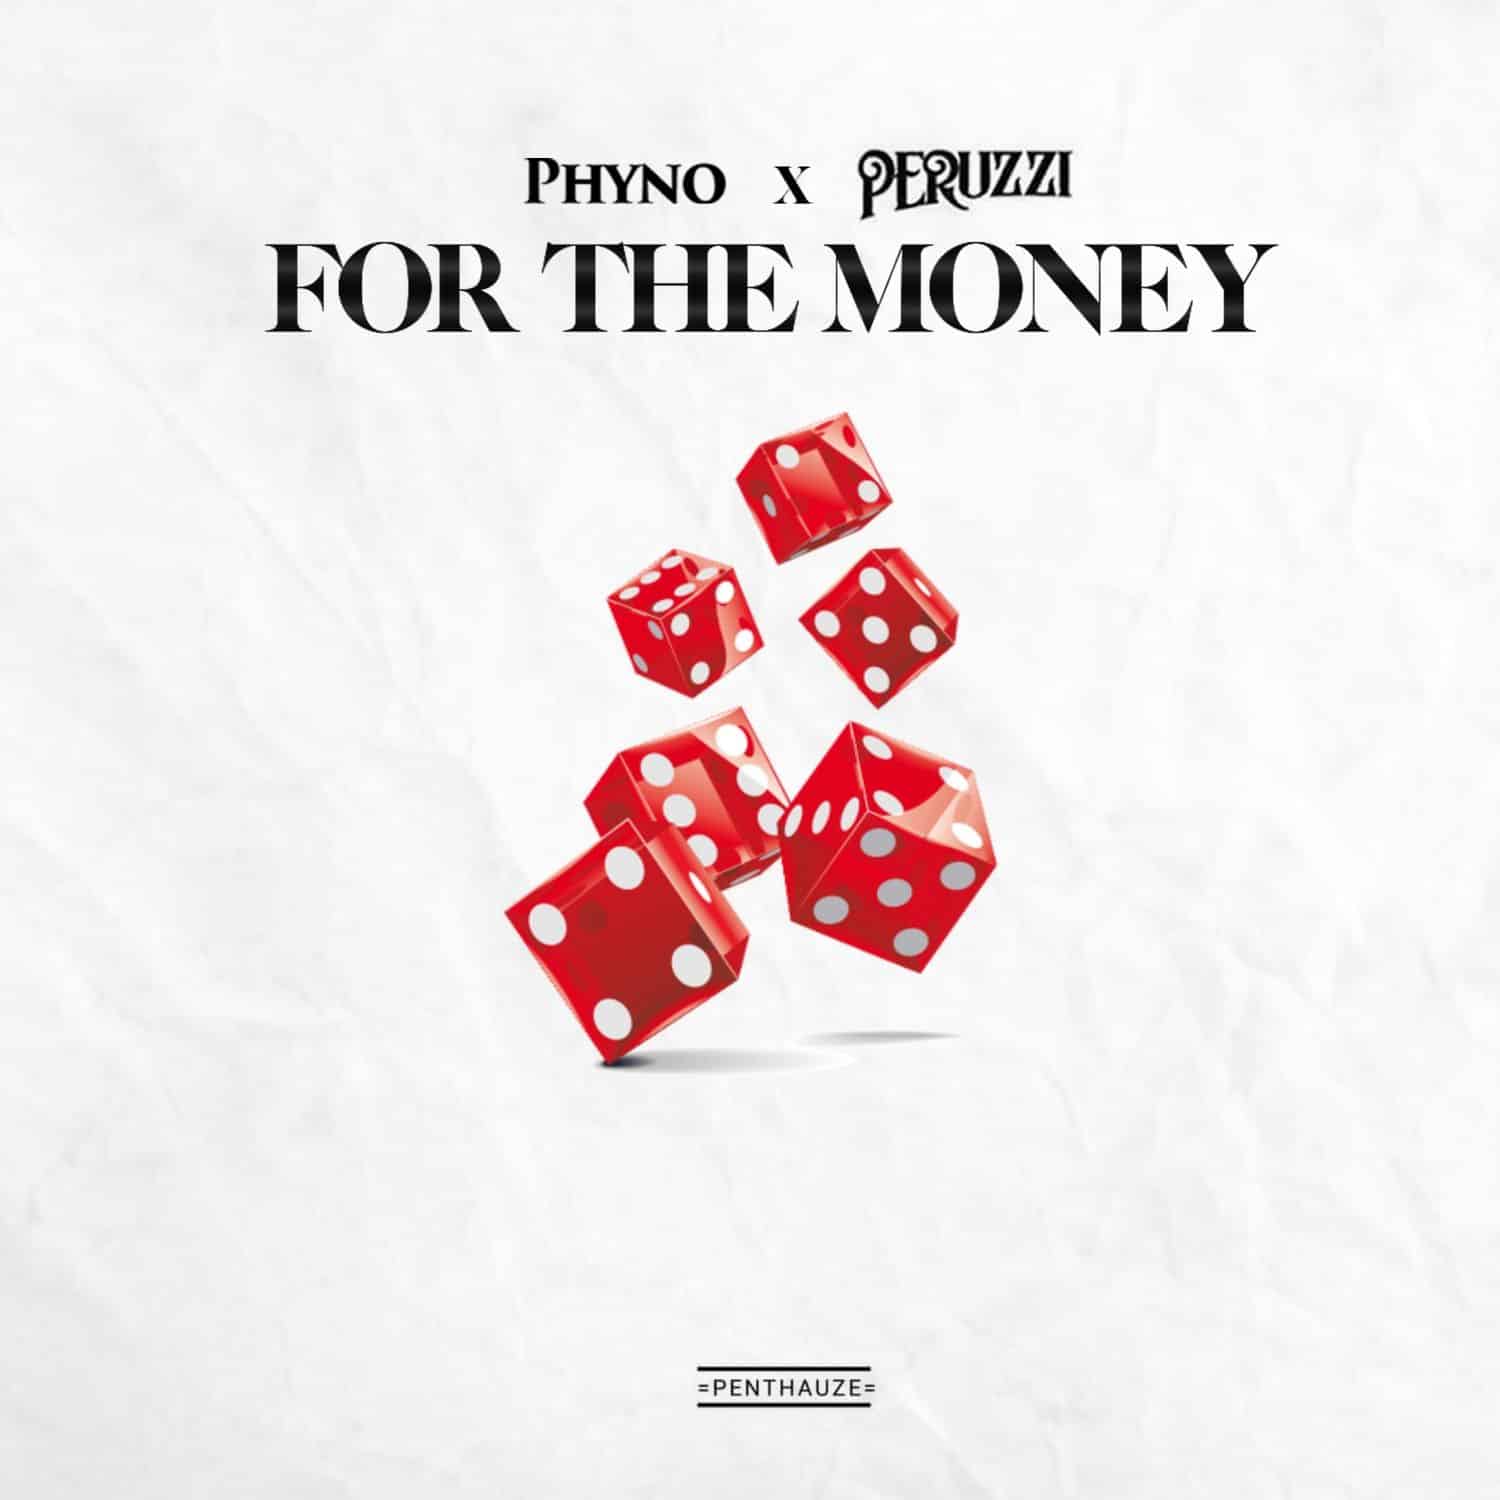 DOWNLOAD: Phyno Ft. Peruzzi – “For The Money” Mp3